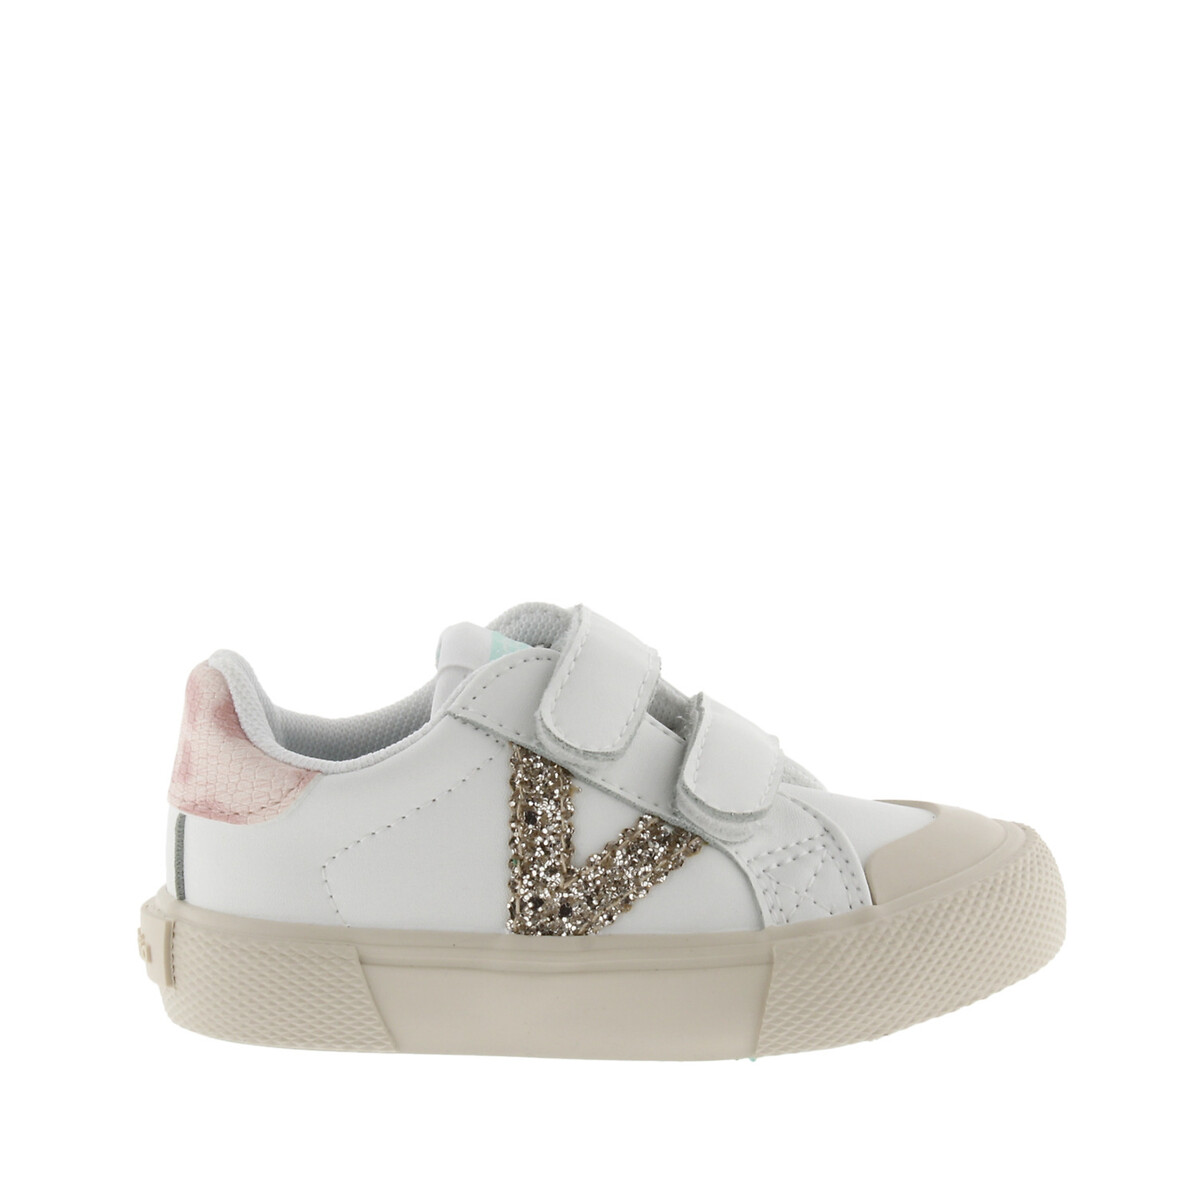 Kids tribu trainers with touch 'n' close fastening, white, Victoria ...